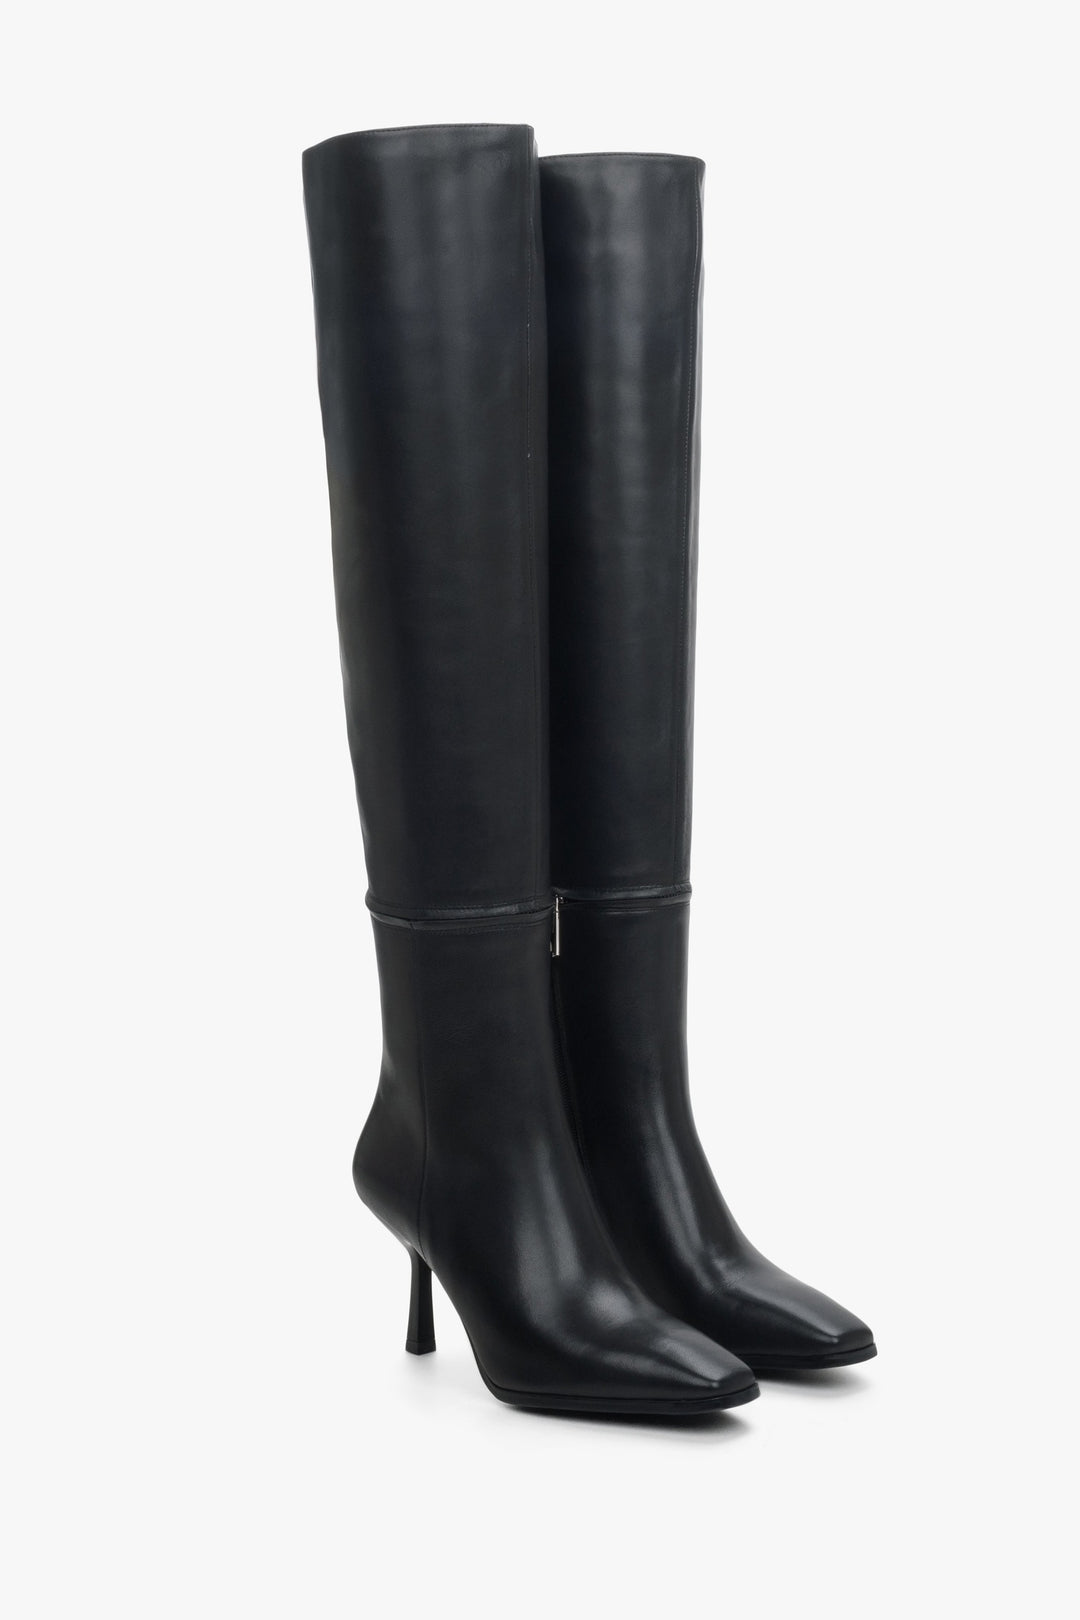 Women's black high boots with a stretchy shaft and high heel by Estro.